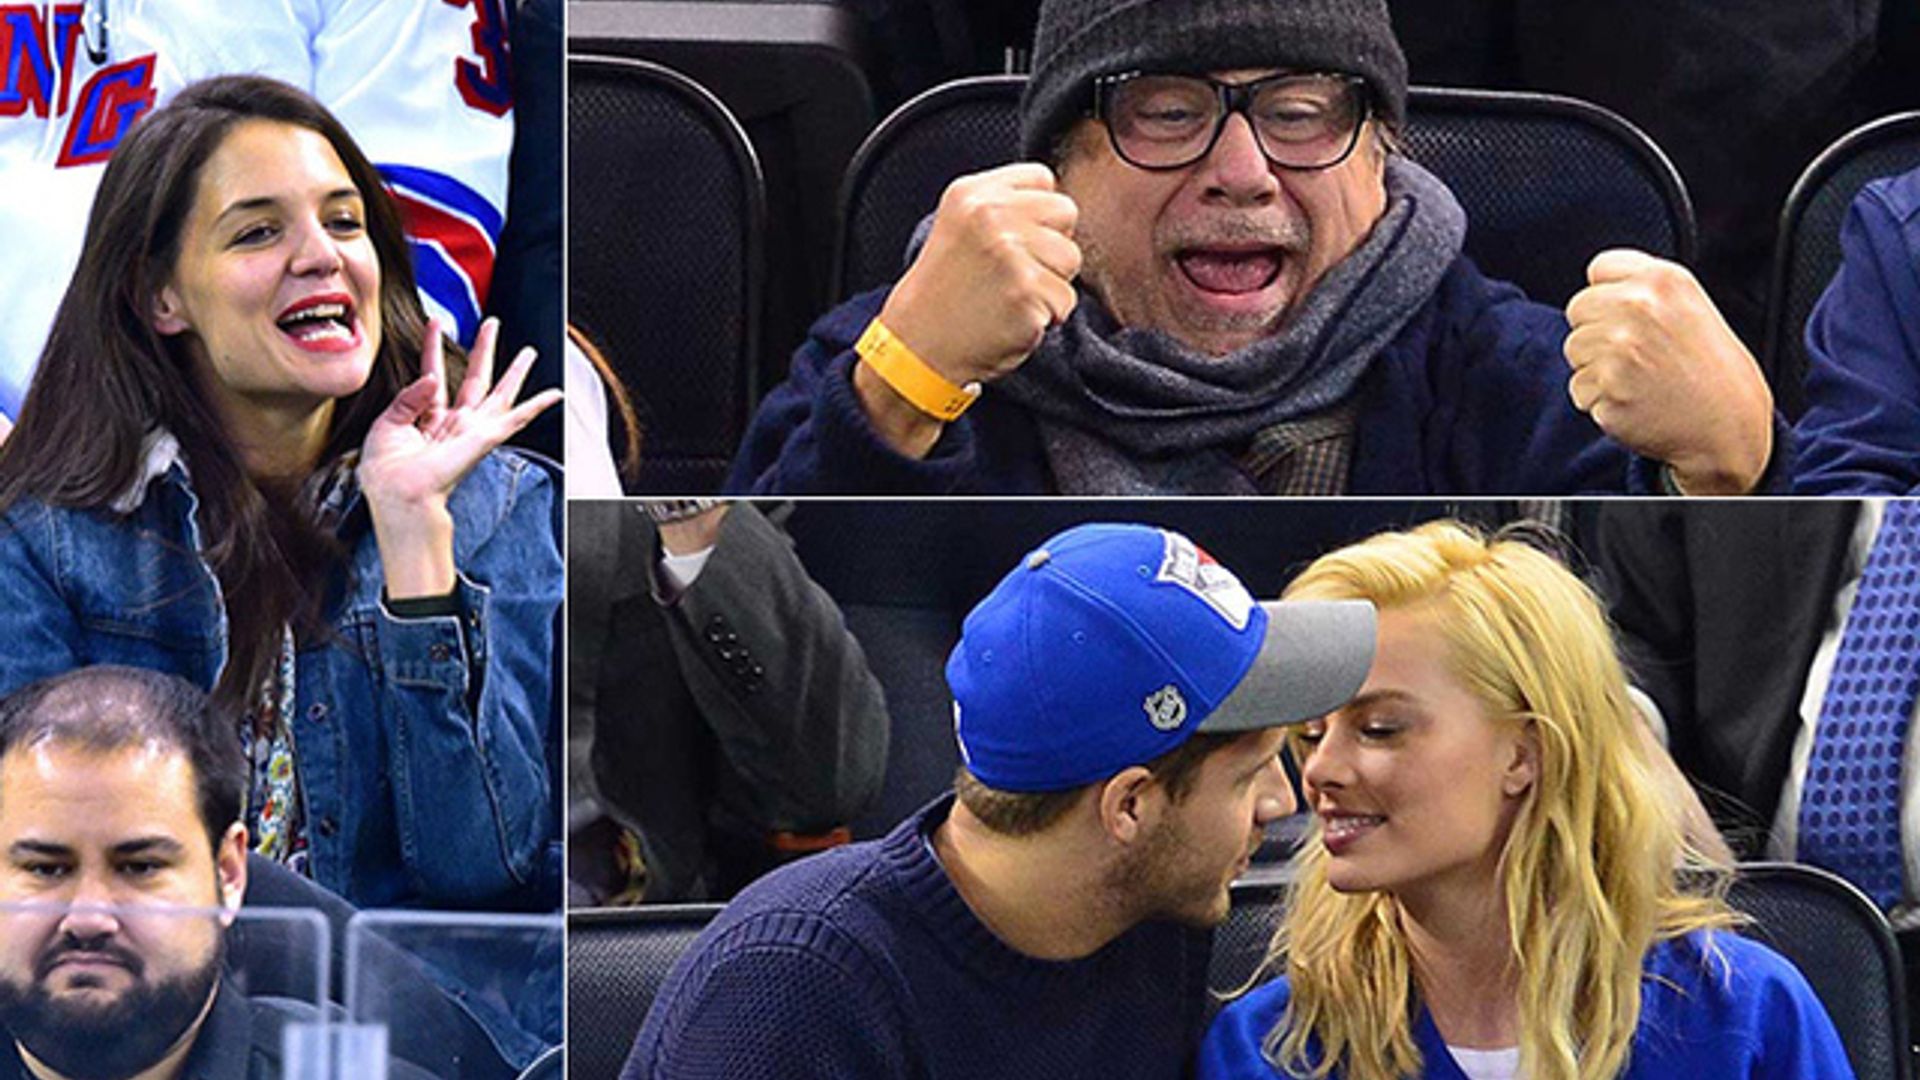 NHL Fever: Celebrity hockey fans cheer on their favourite teams